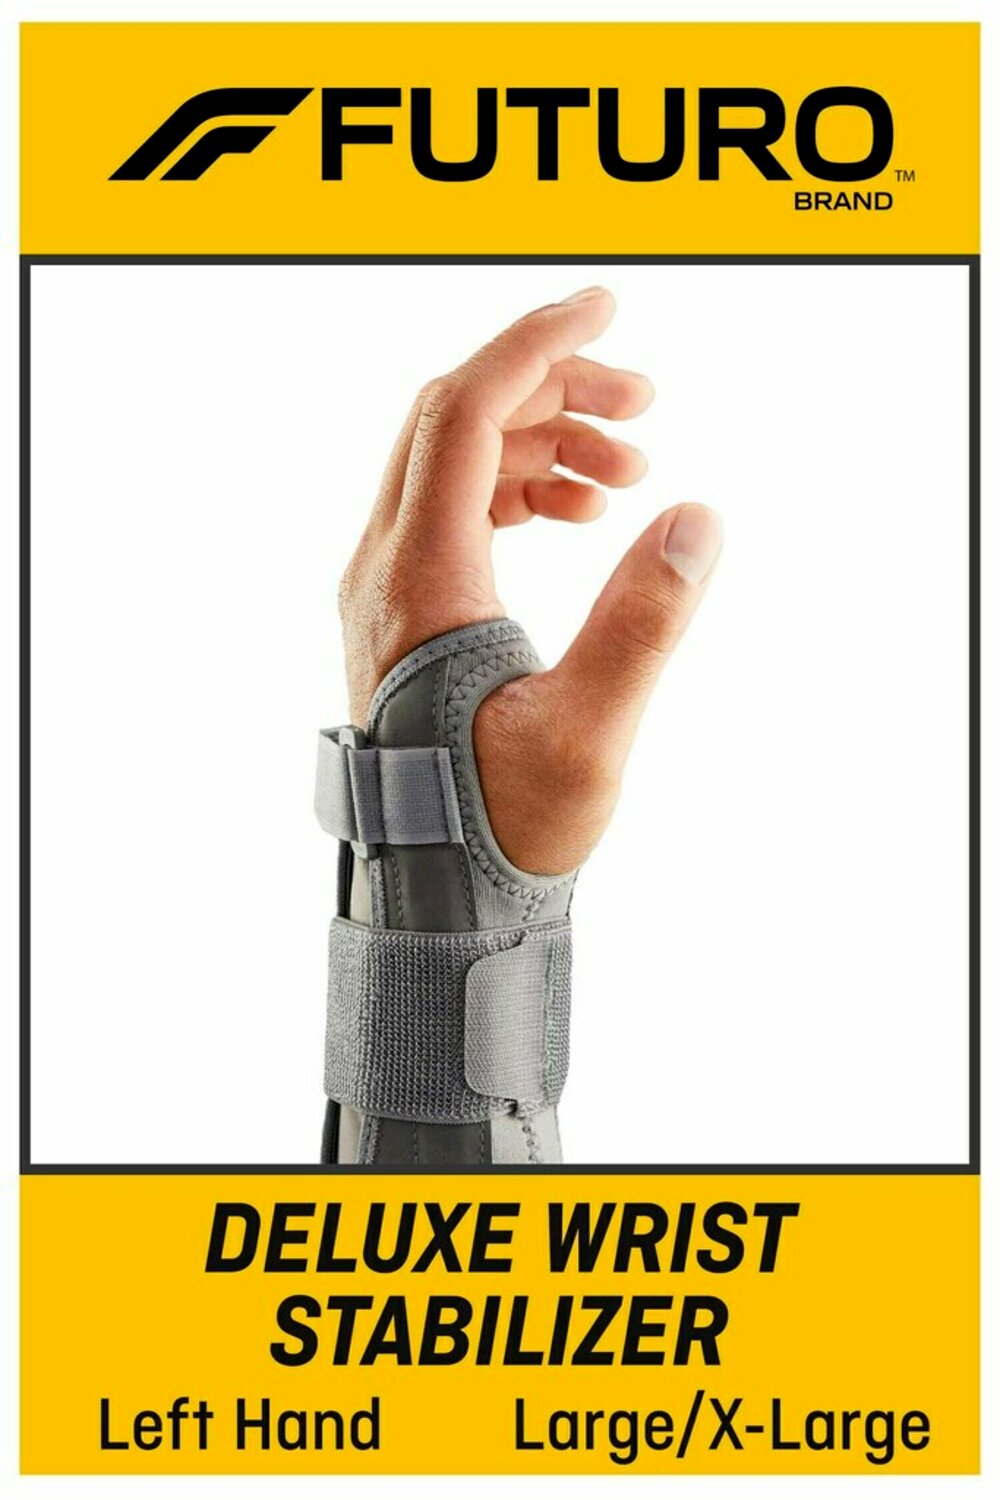 7100155714 - FUTURO Deluxe Wrist Stabilizer Left Hand, 45538ENT, Large/X-Large